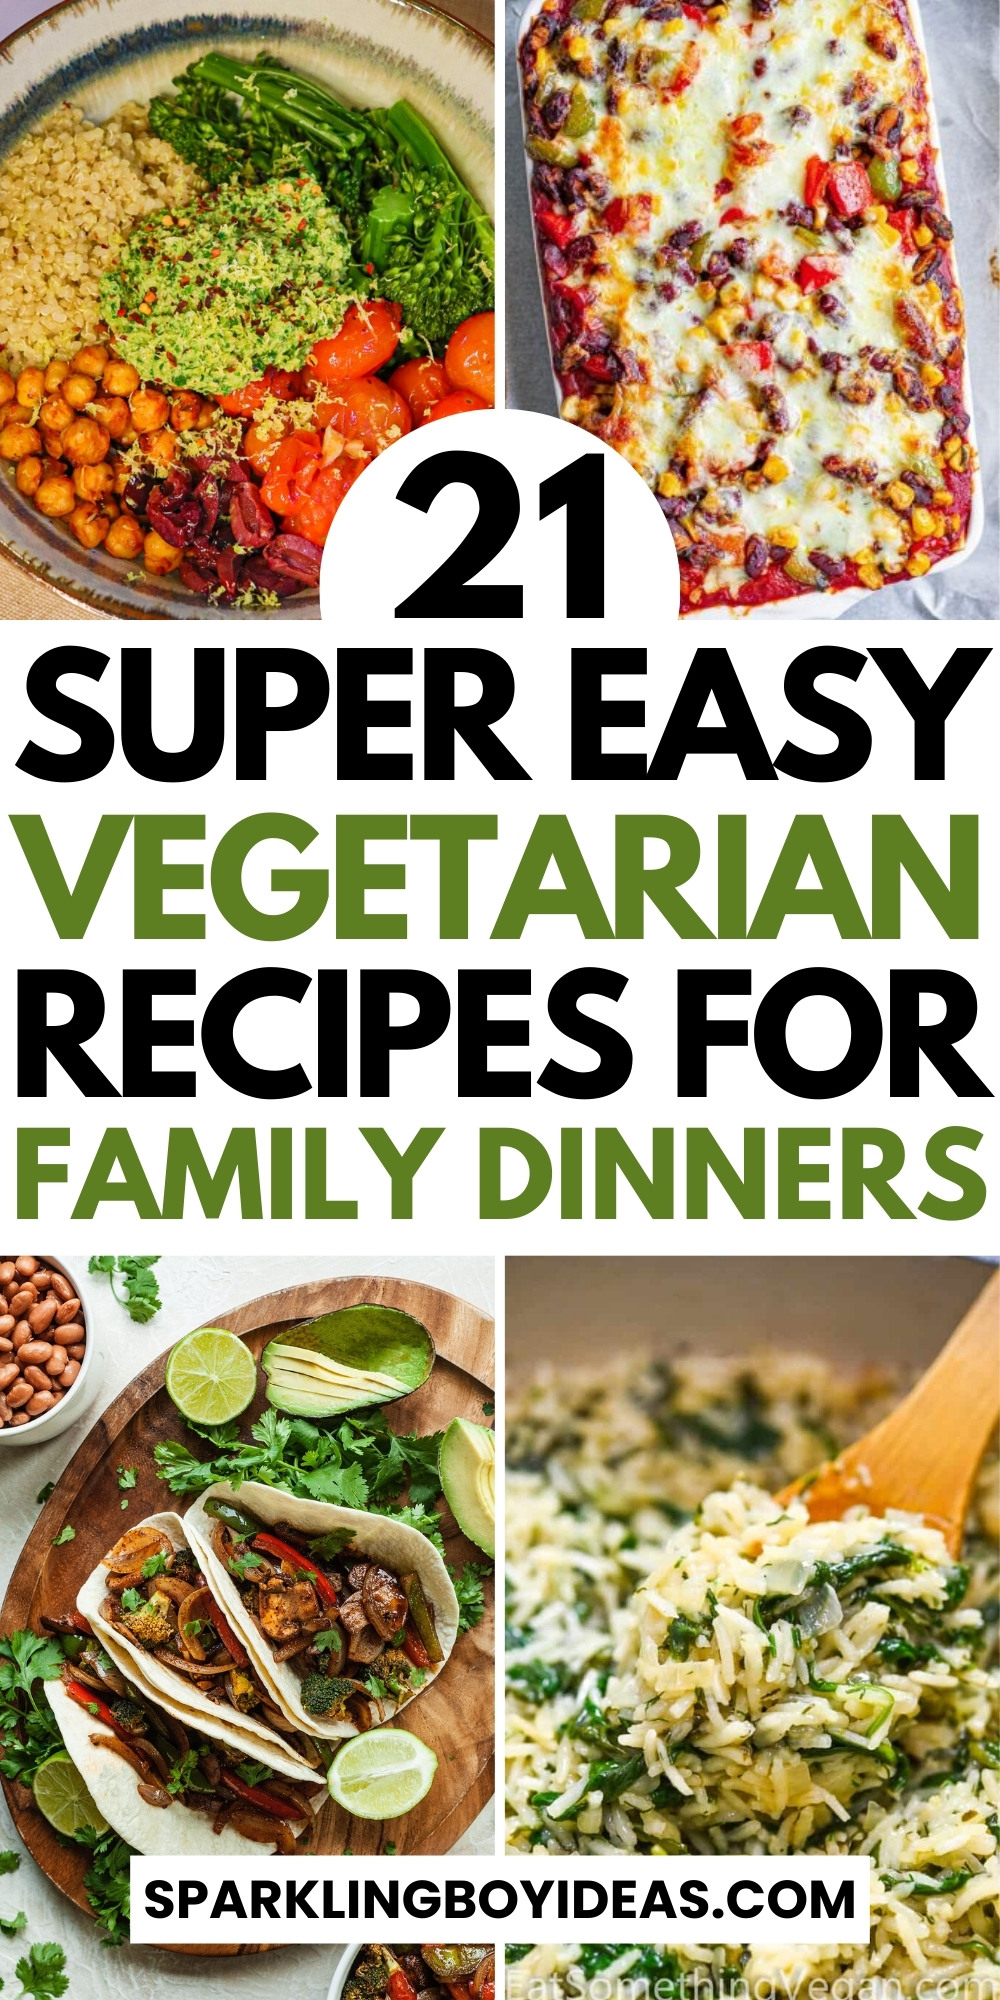 21 Quick And Easy Vegetarian Dinner Recipes - Sparkling Boy Ideas